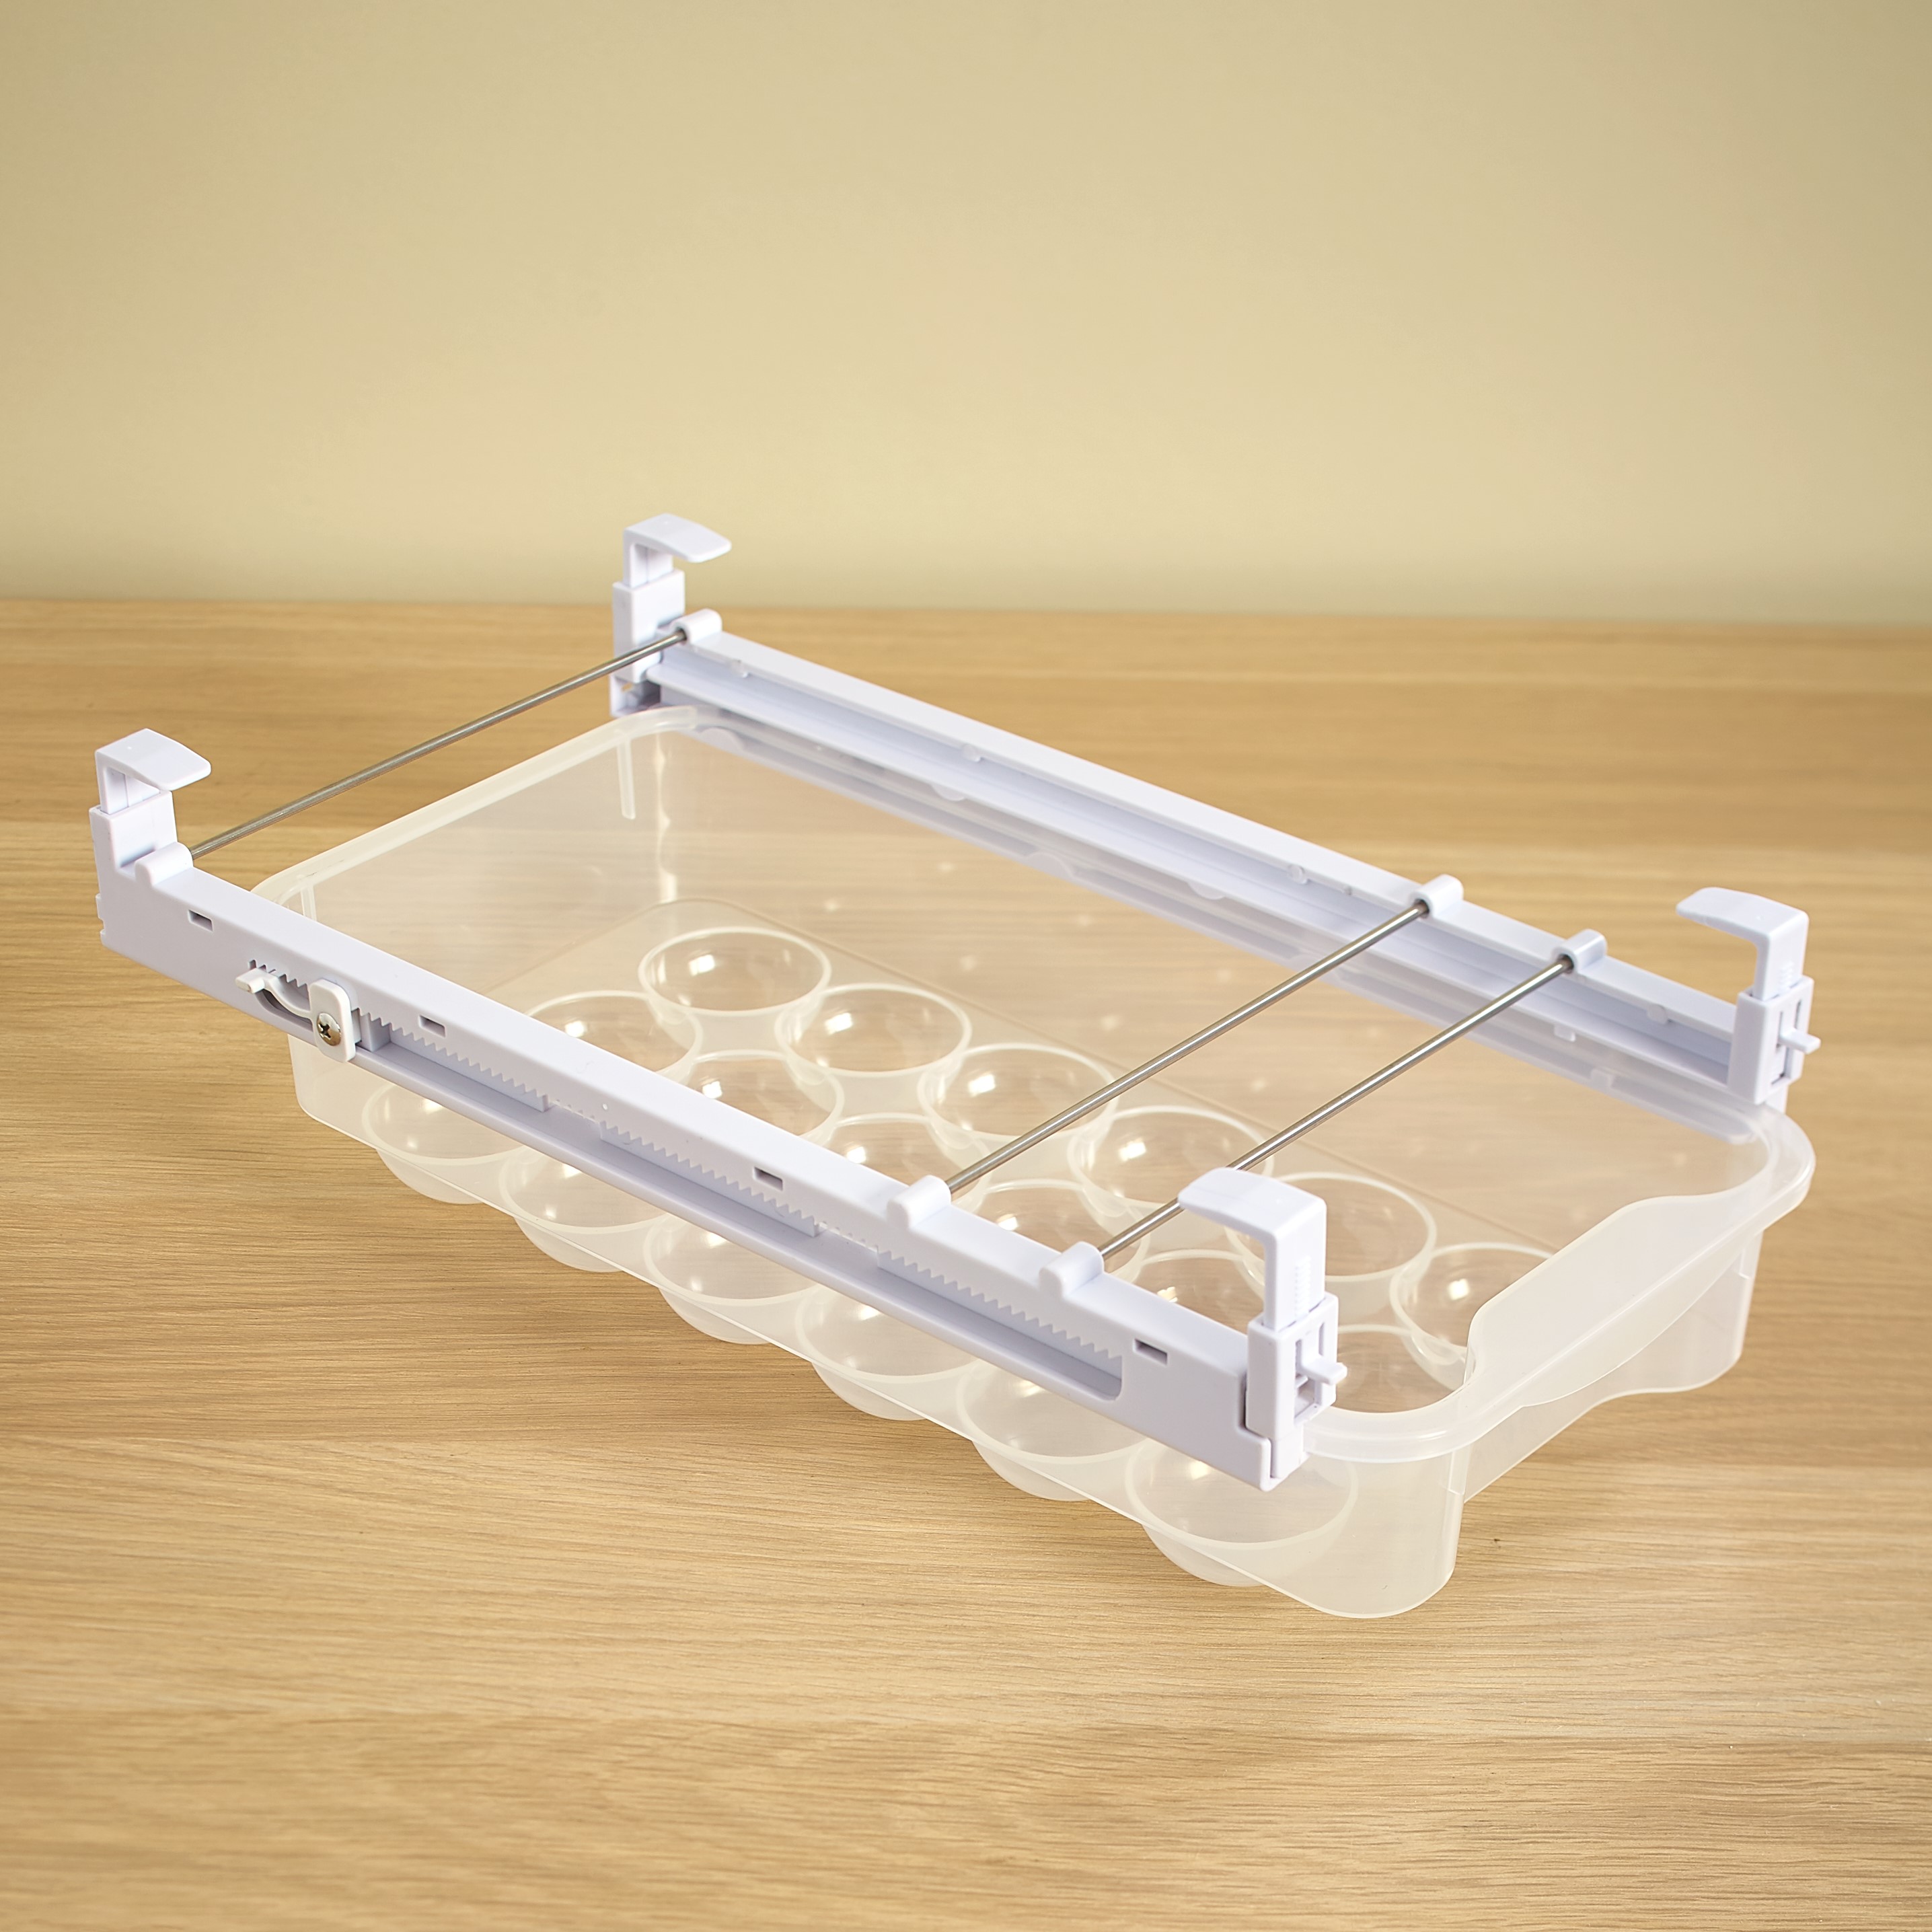 Auto Rolling Refrigerator Egg Drawer,Large Capacity Snap-on Hanging Egg  Holder Tray for Refrigerator Egg Container Adjustable and Space Saving